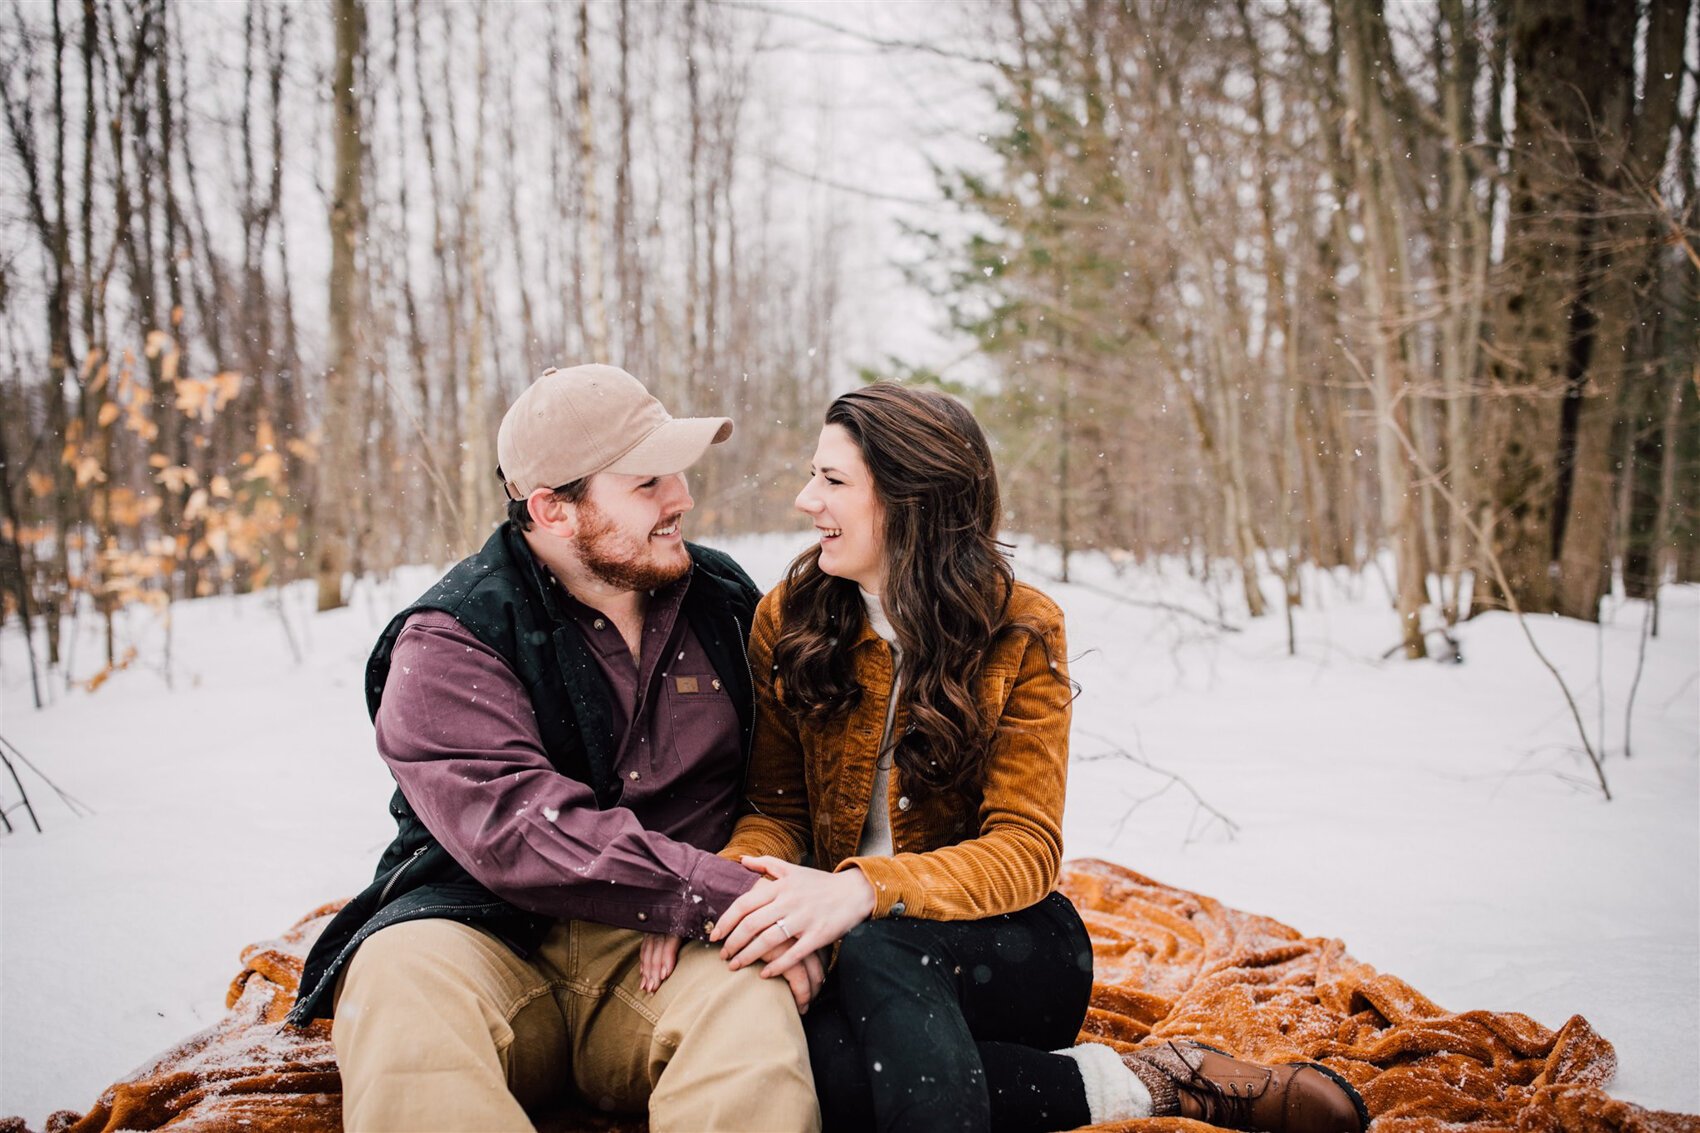 Carlie-and-Joe-Engagement-Pictures-Winter-2020-4.jpg